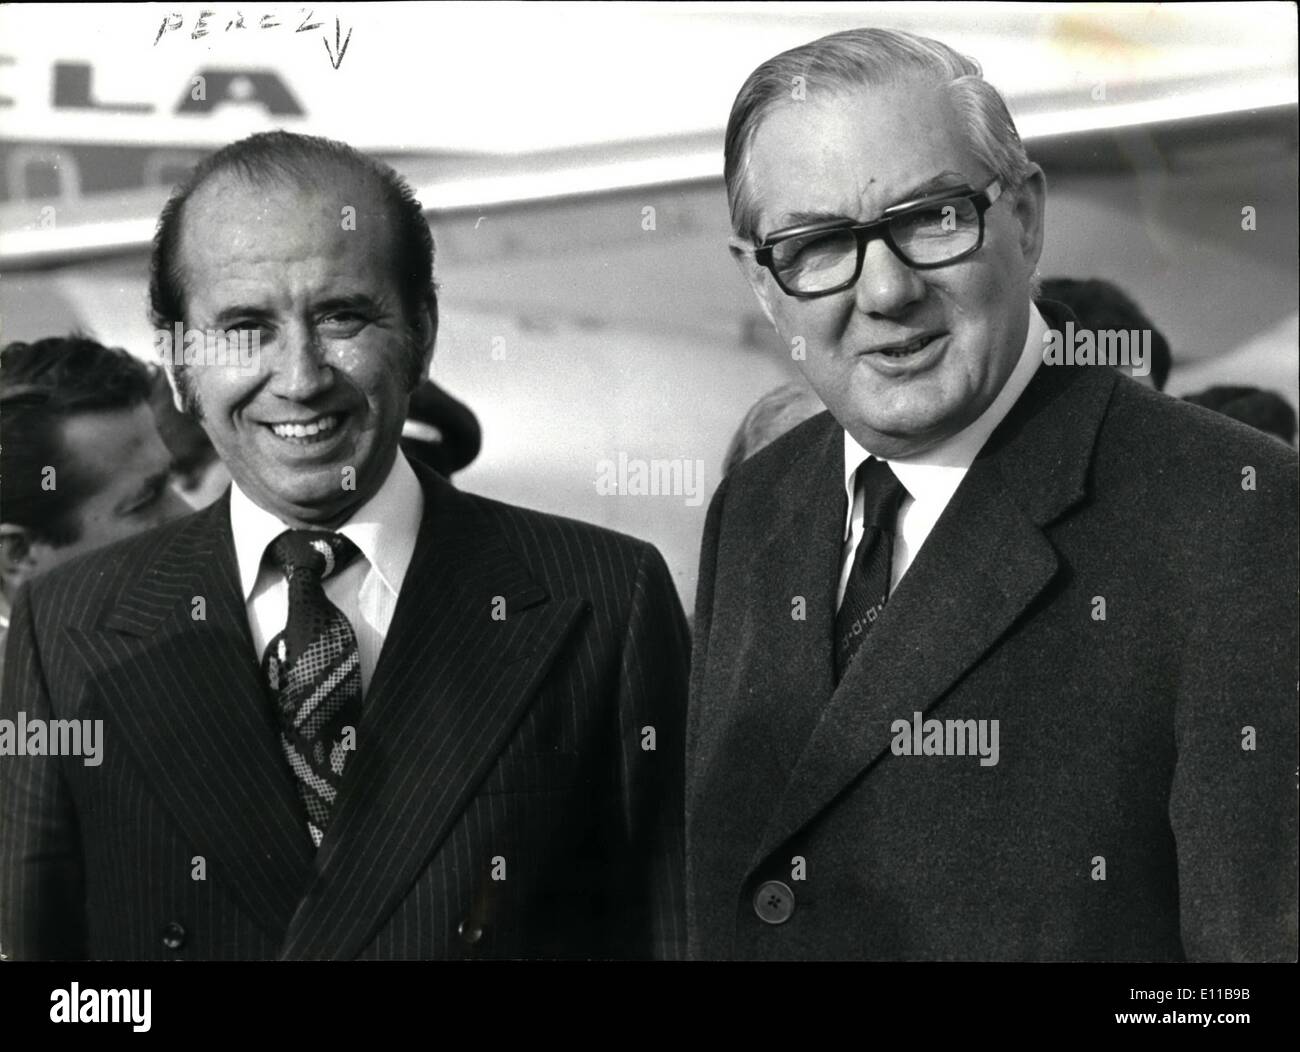 Nov. 11, 1976 - President Of Venezuela Arrives In Britain For A Four-Day State Visit. Photo shows President of Venezuela, Carlos Andres Perez pictured with Prime Minister, James Callaghan who met him on arrival at Heathrow Airport yesterday when he arrived for a four-day State visit yesterday. Stock Photo